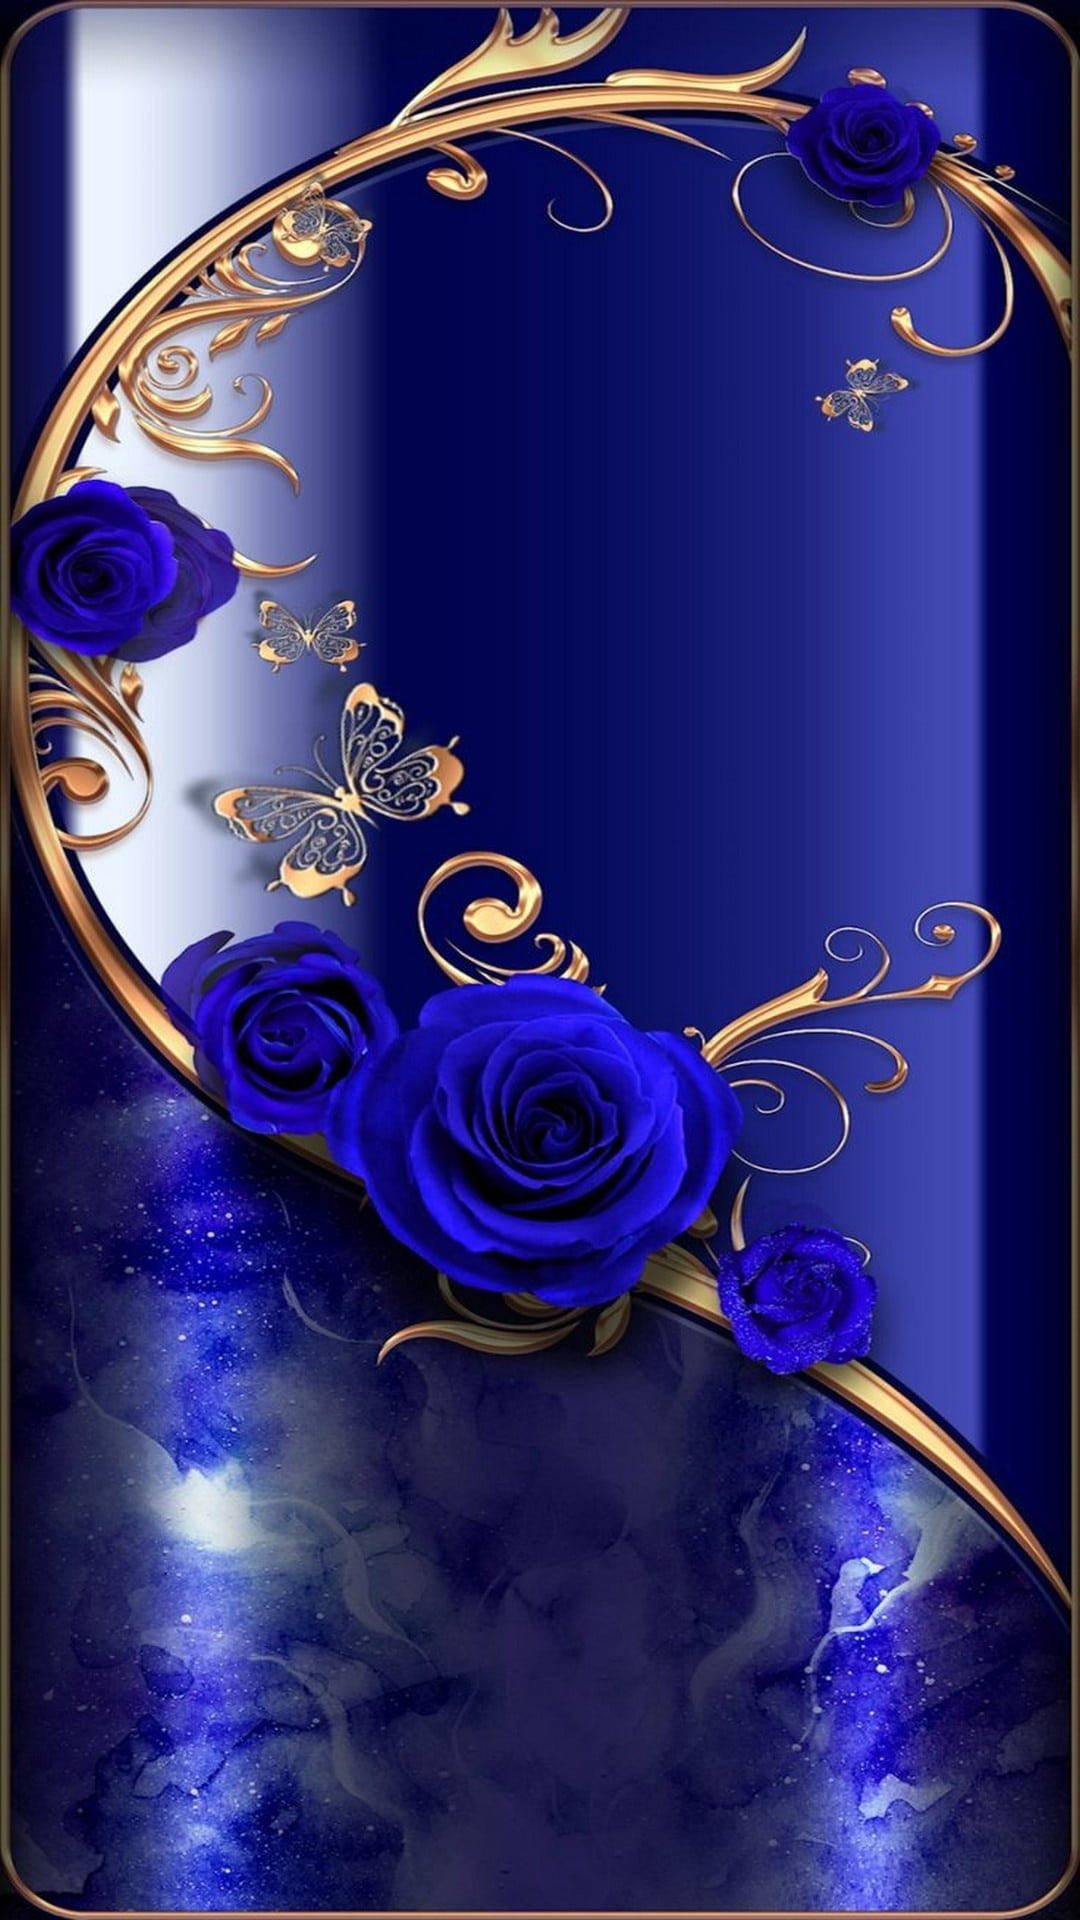 Iphone 12 Pro Max Gold With Roses Wallpaper